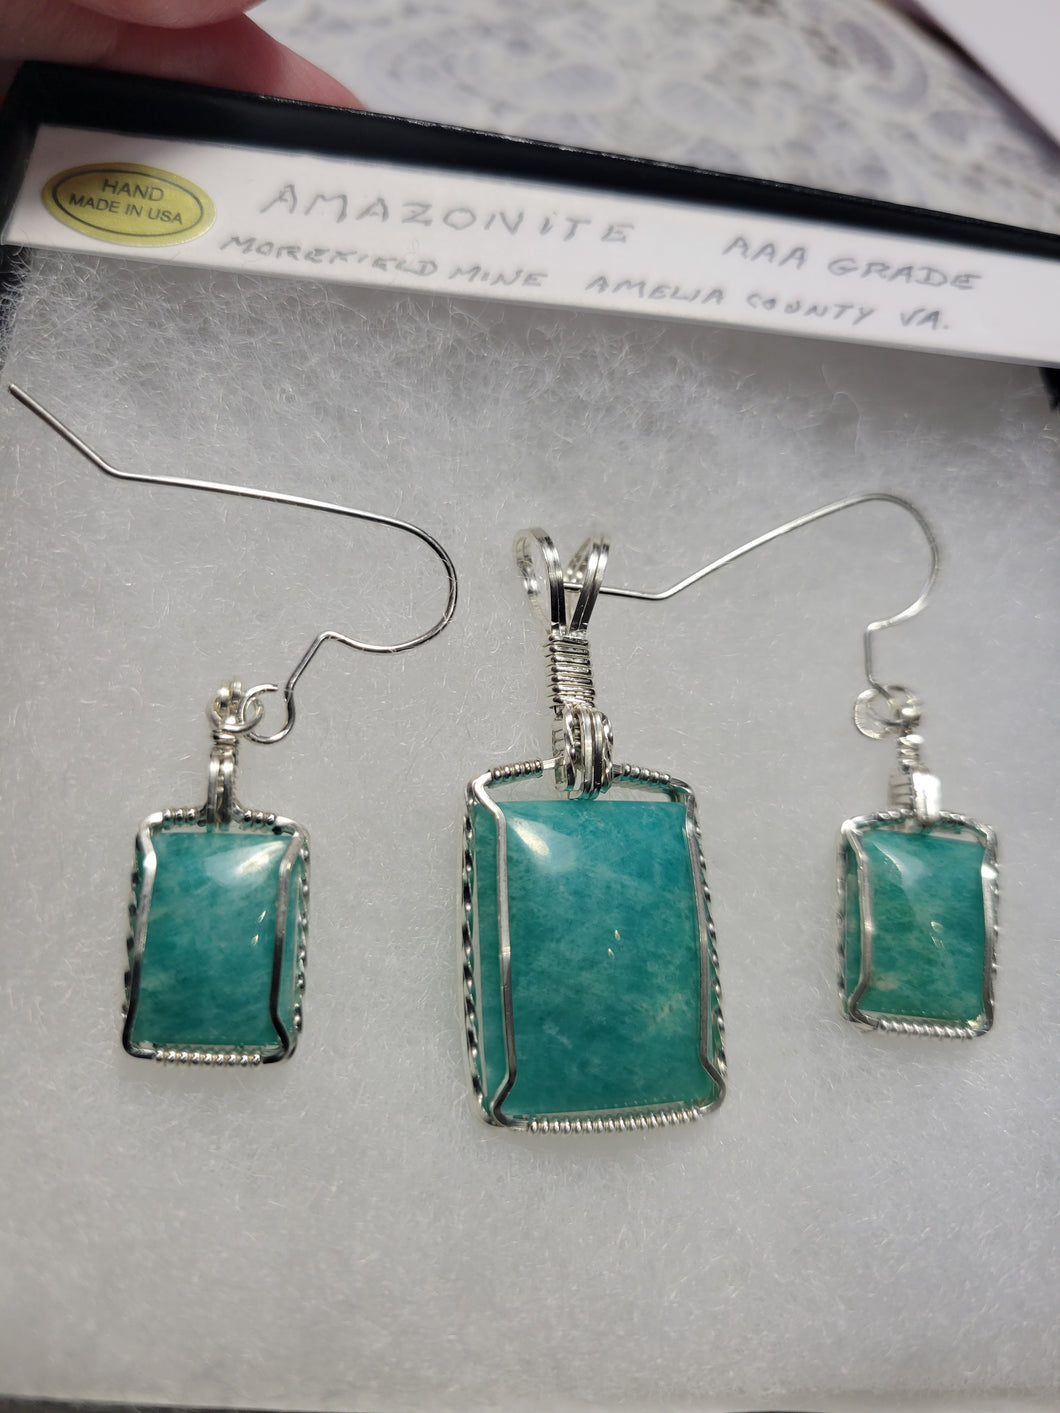 Custom Wire Wrapped Amazonite Morefield Mine Amelia Cty VA Set Earrings. Necklace/Pendant Sterling Silver